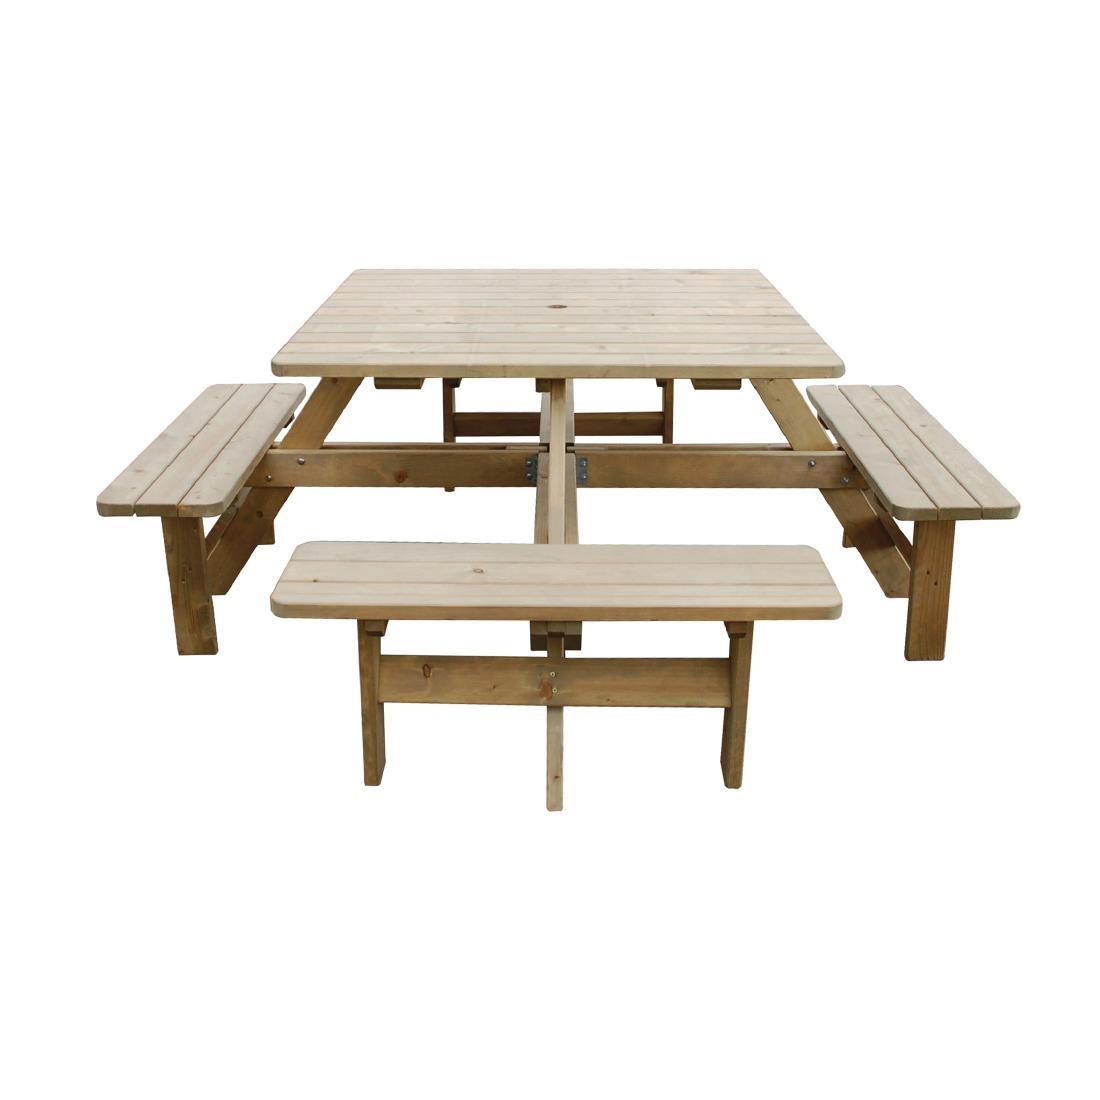 Rowlinson Square Wooden Picnic Table 6.5ft - CG096  - 2